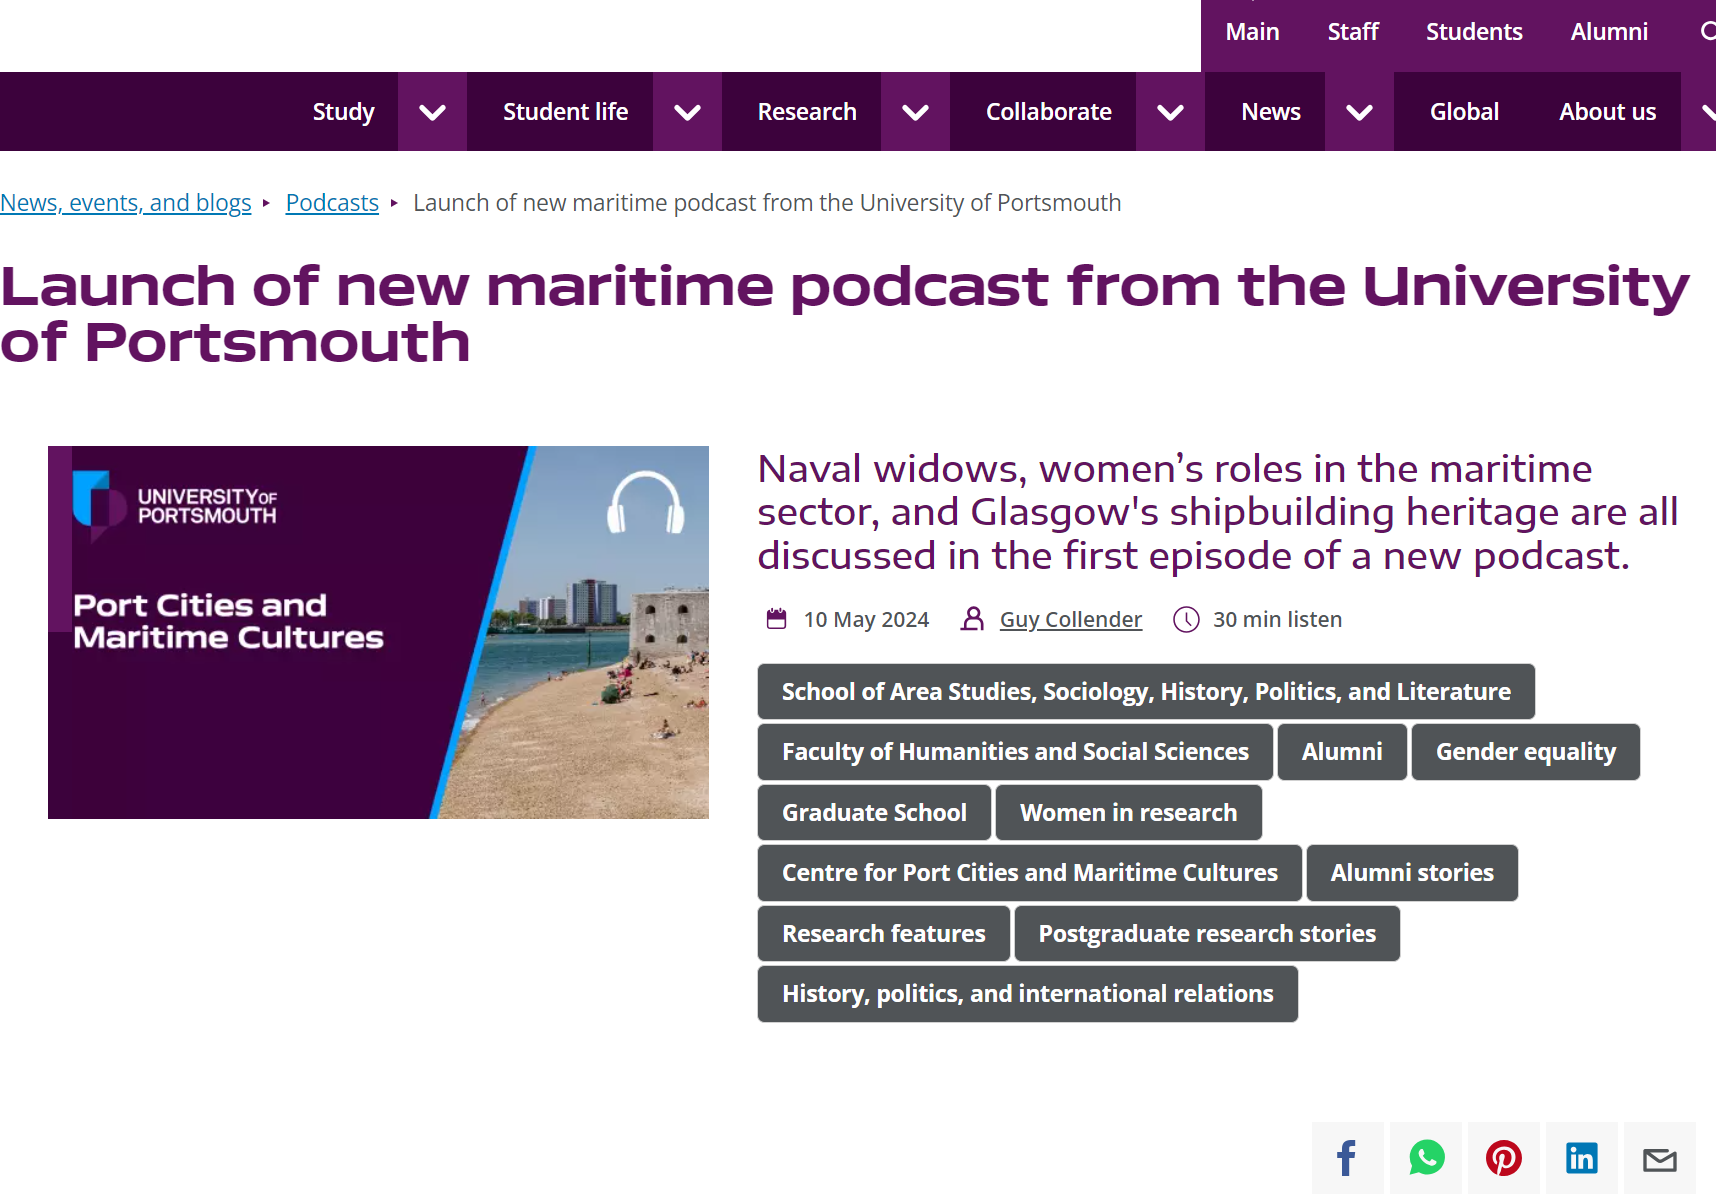 Port Cities and Maritime Cultures launch new podcast